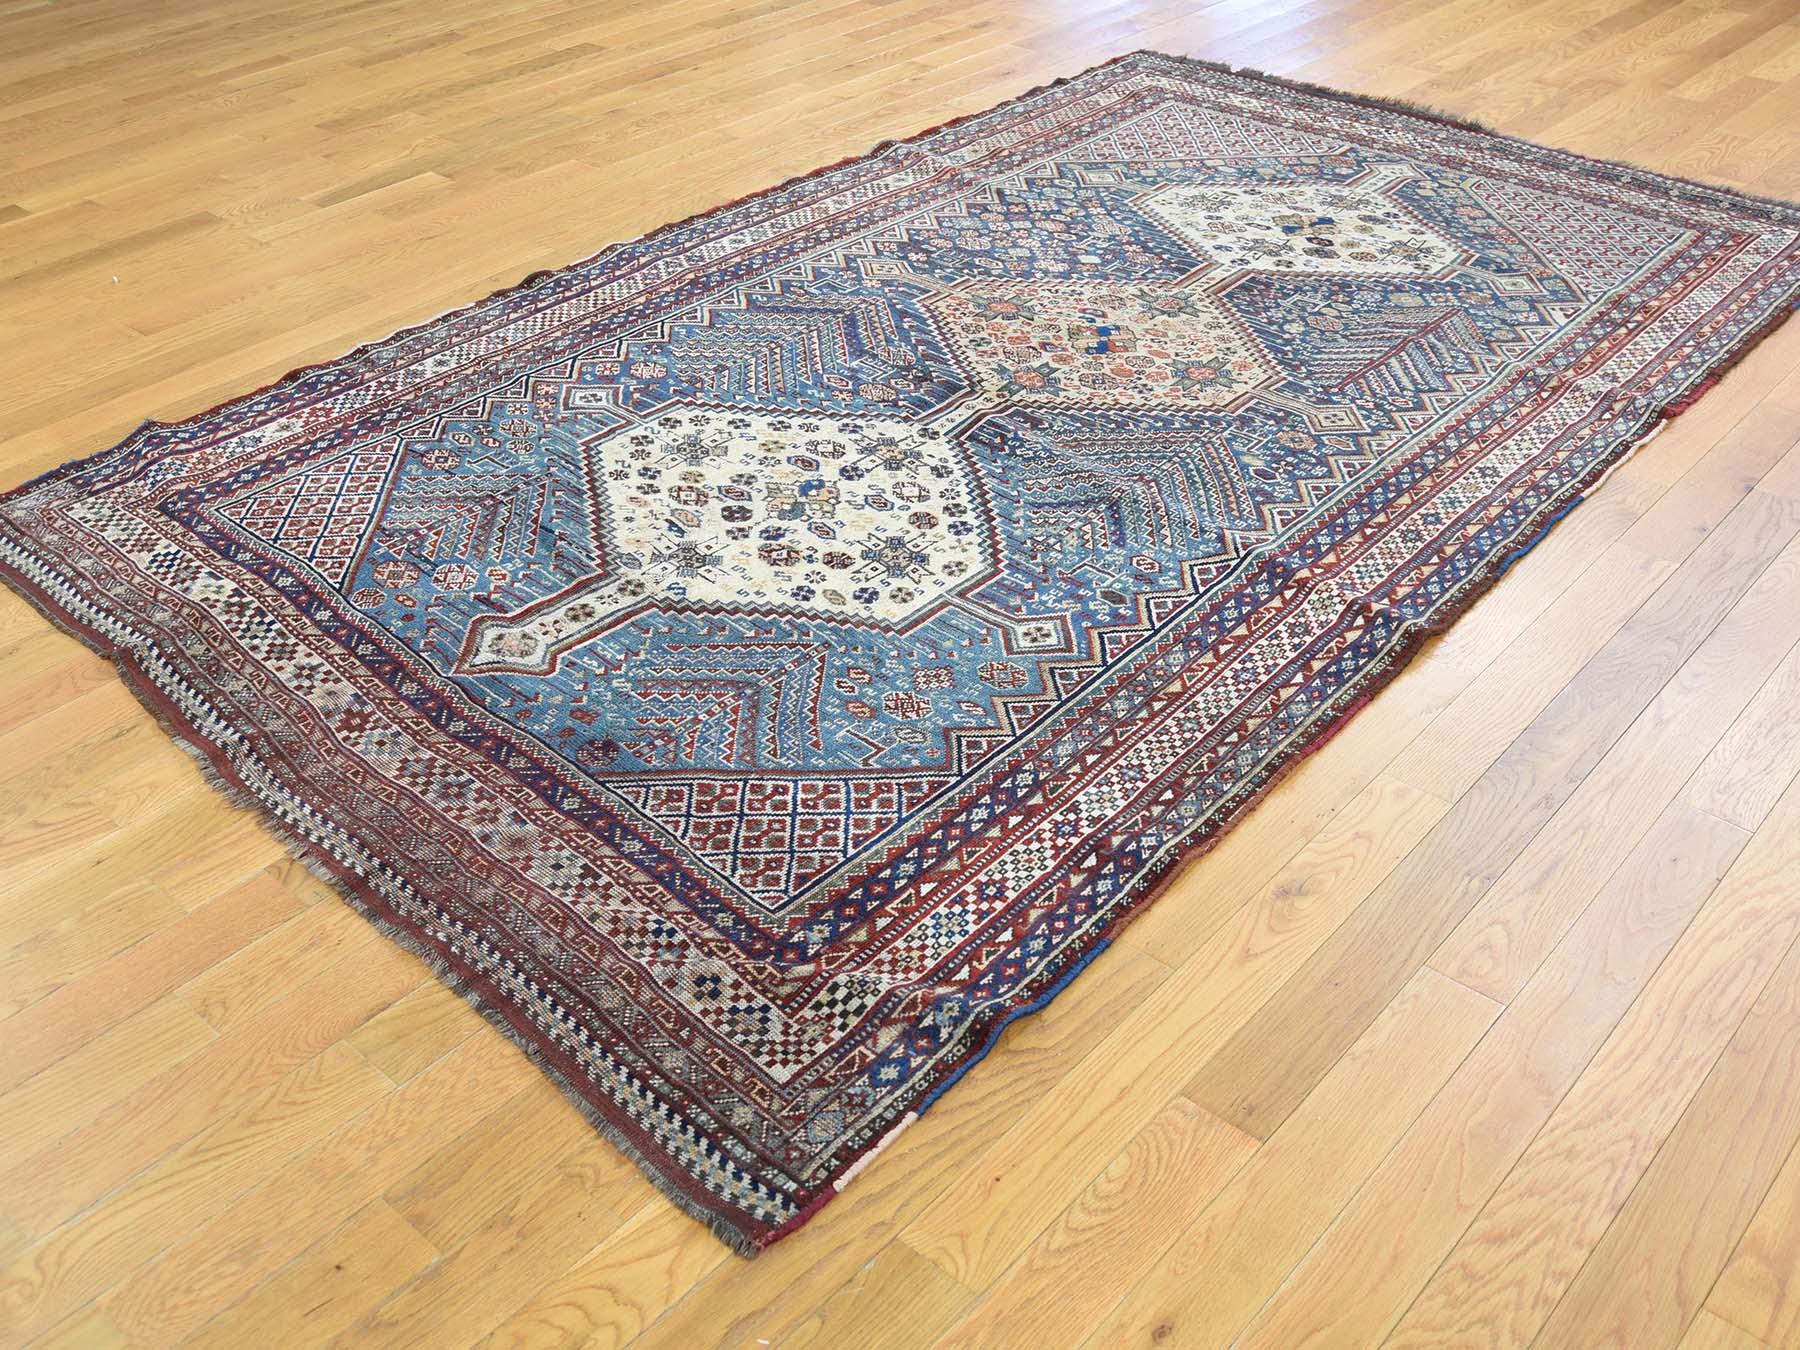 Hand-Knotted 1900 Antique Persian Qashqai Rug, Exquisite Blue